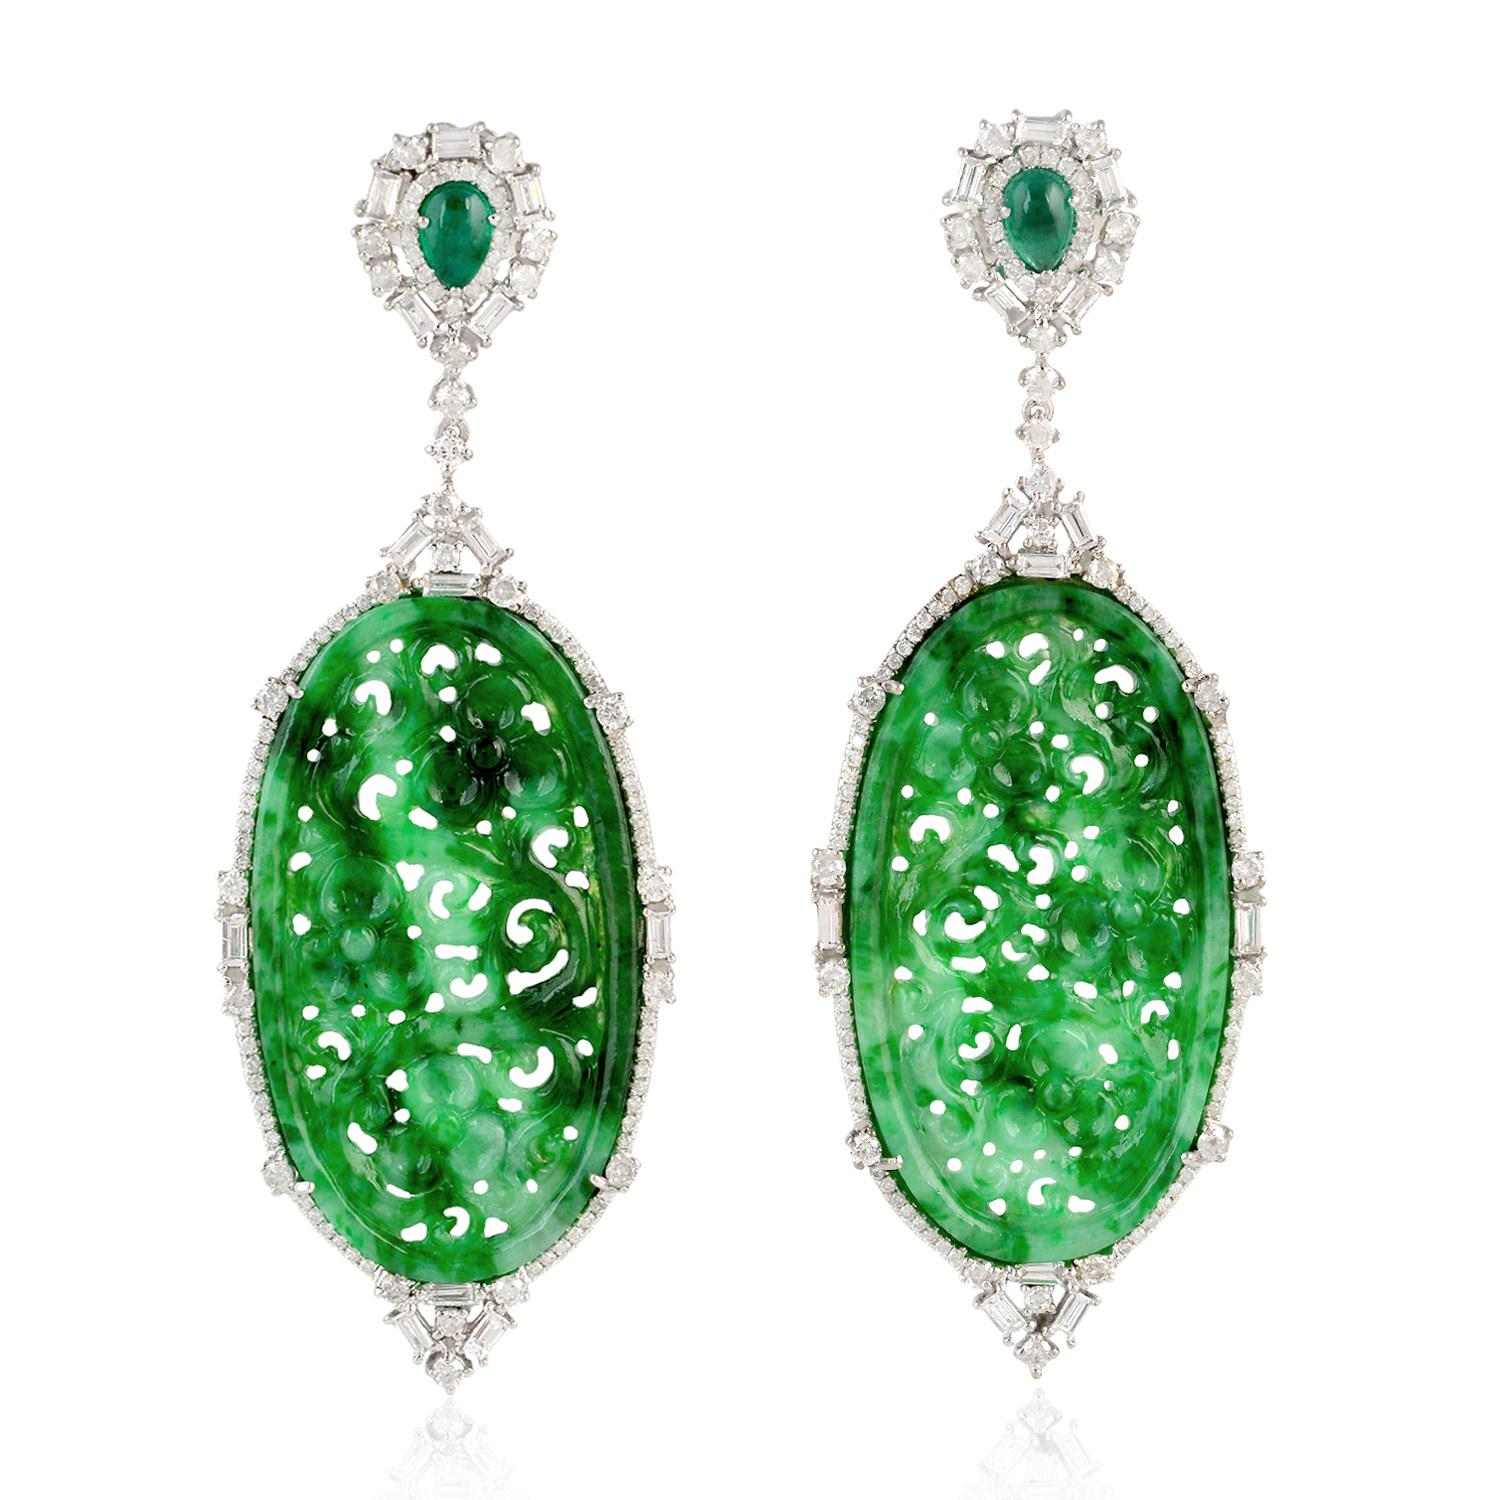 Contemporary 37.76ct Carved jade Dangle Earrings With Diamonds & Emerald In 18k White Gold For Sale